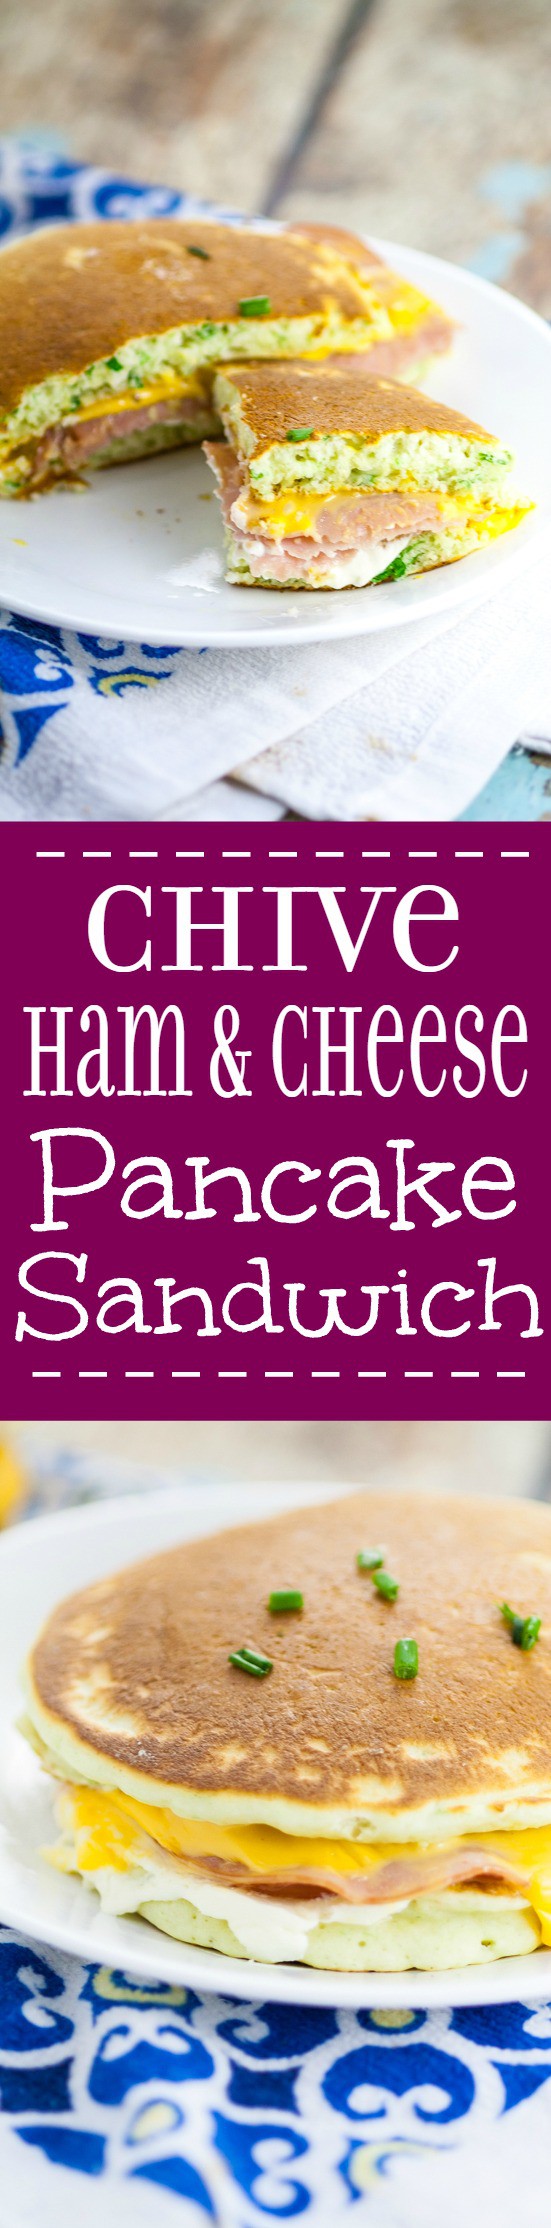 Chive Ham and Cheese Pancake Sandwiches for an easy breakfast recipe.  Unique and tasty Chive Ham and Cheese Pancake Sandwiches that are totally delicious, freezer friendly, and even great for a breakfast on-the-go!